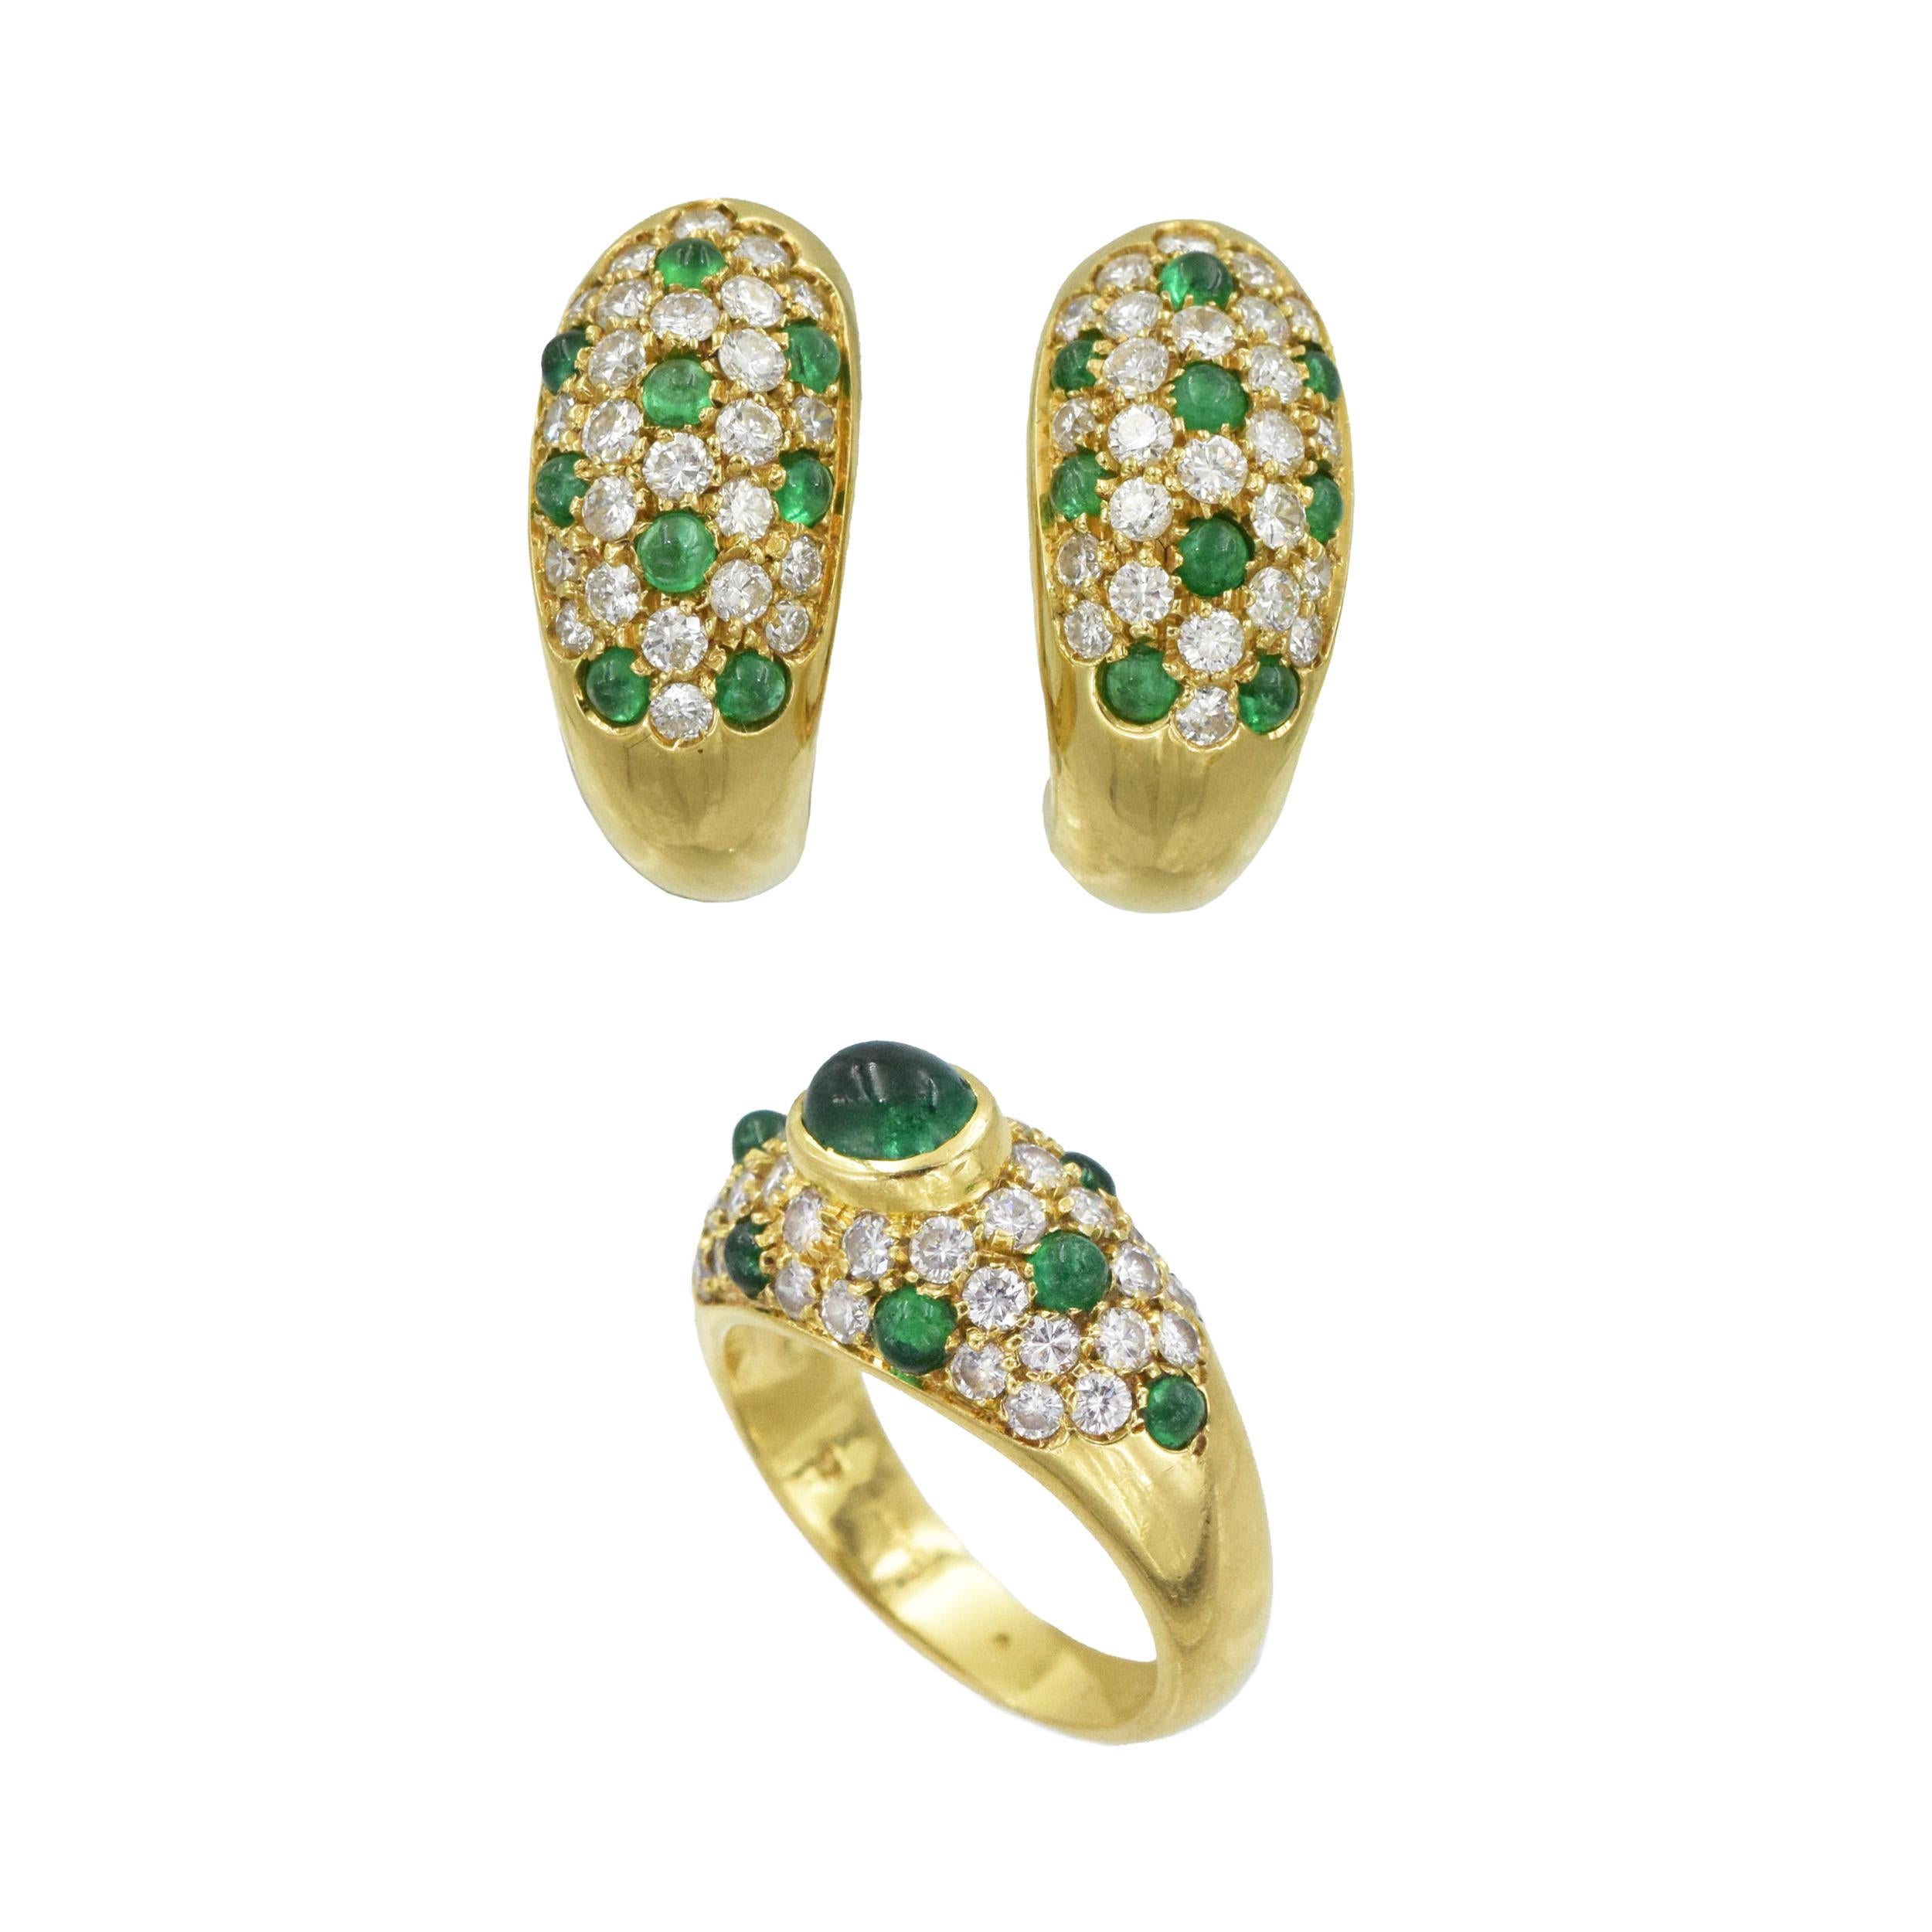 Cartier Diamond and Emerald Ring and Earrings. This set has a ring with 35 round diamonds weighing approximately 1.05 carat and 9 cabochon emeralds weighing approximately 0.80carat
(inclusive of 0.5carat center) all set in 18k yellow gold. Signed